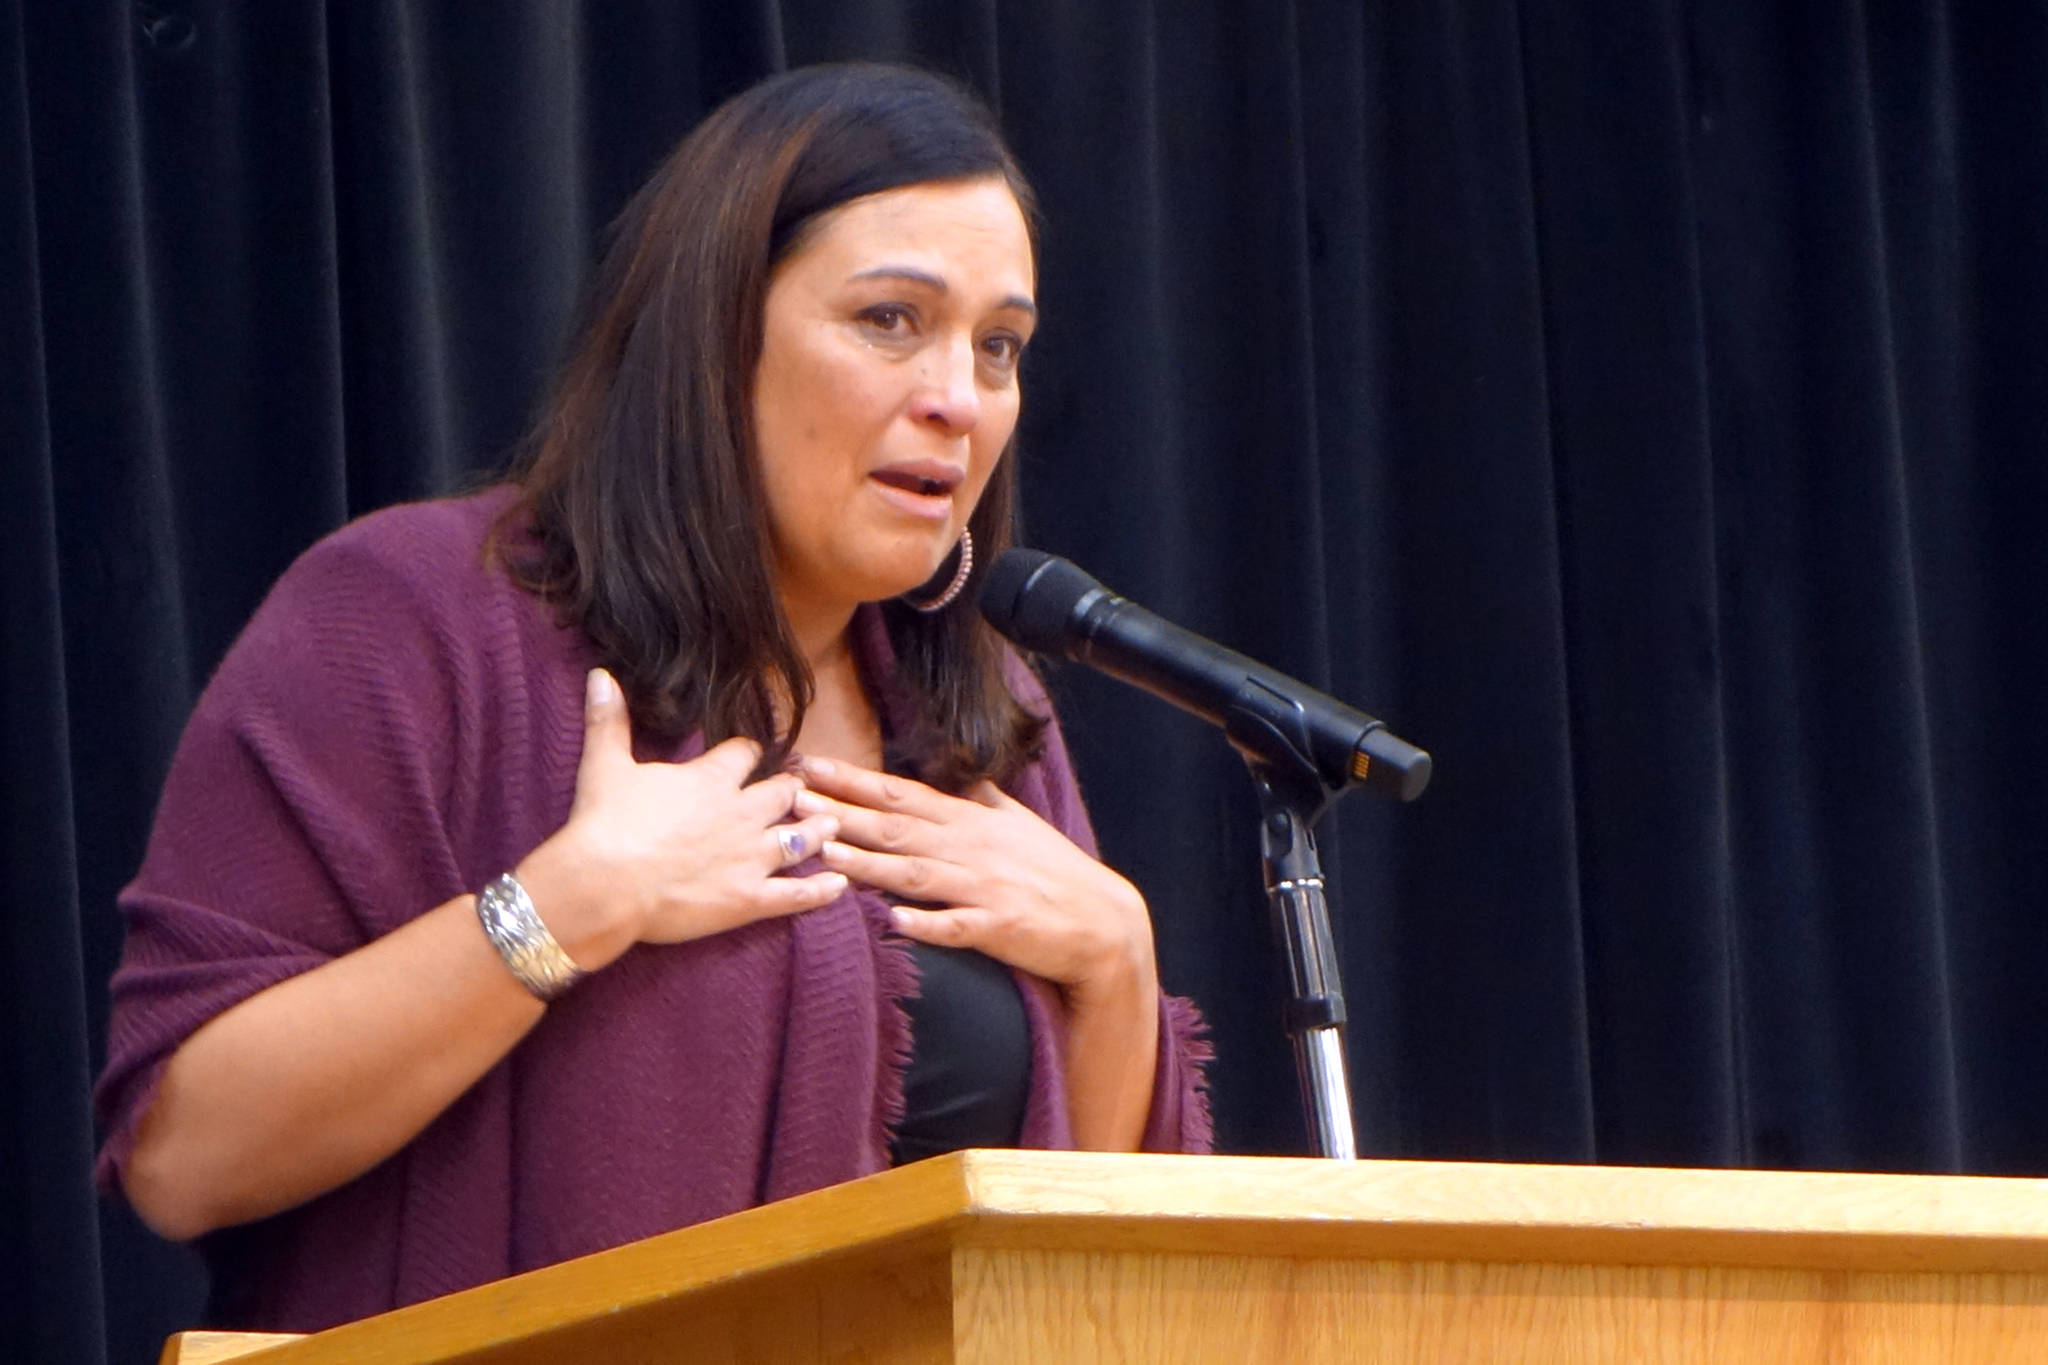 Deborah Parker, National Indigenous Women’s Resource Center board member, activist and survivor of sexual and physical violence, delivers the keynote speech at a domestic violence awareness summit Friday, Oct. 25, 2019. (Ben Hohenstatt | Juneau Empire)